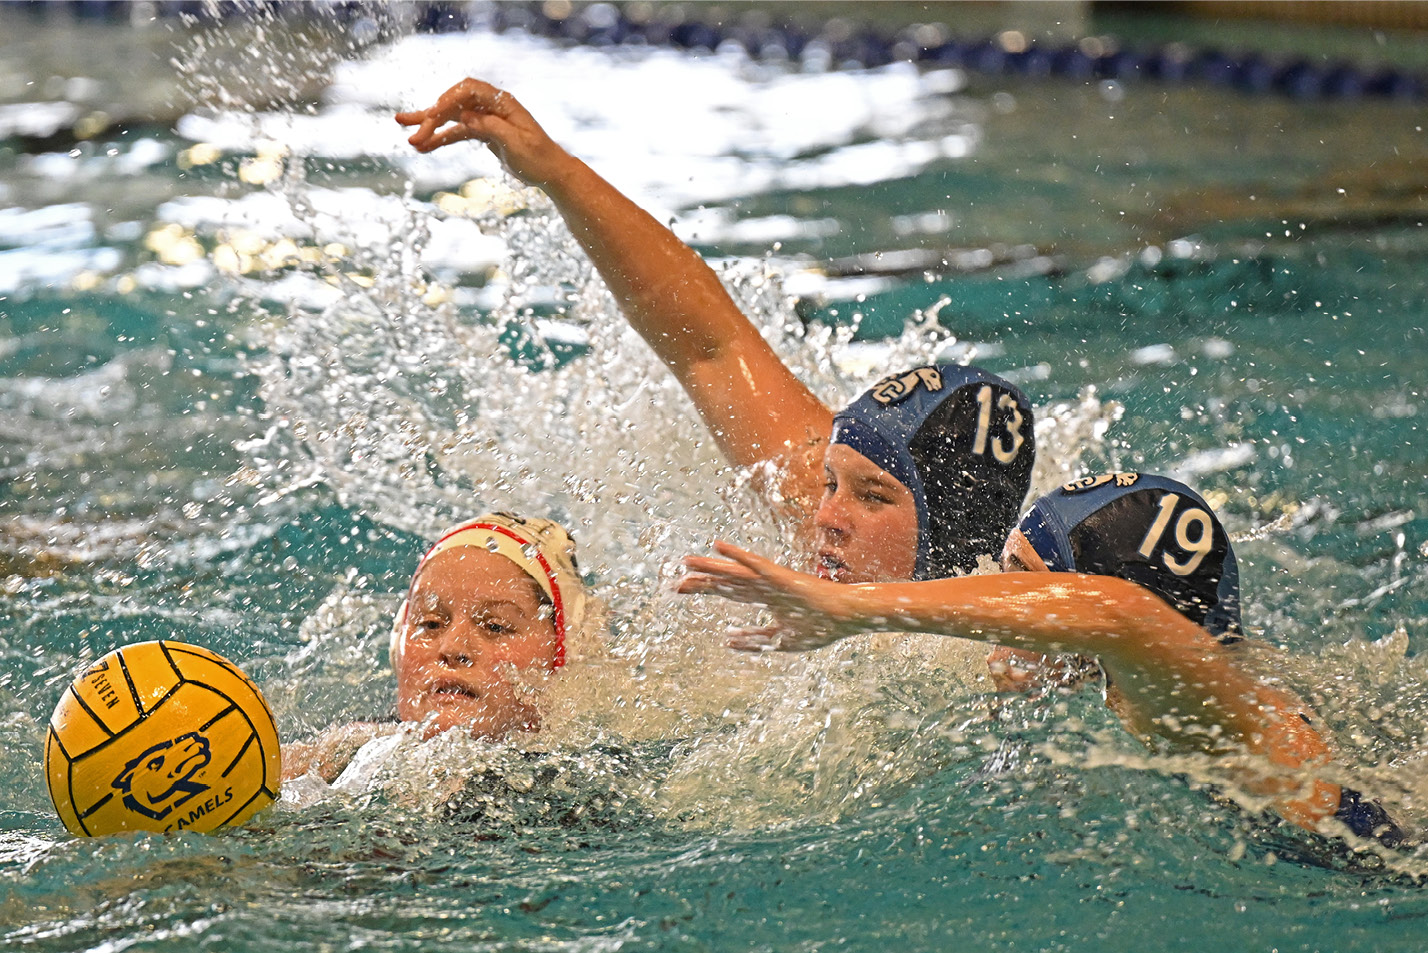 Women's water polo players chase the ball.